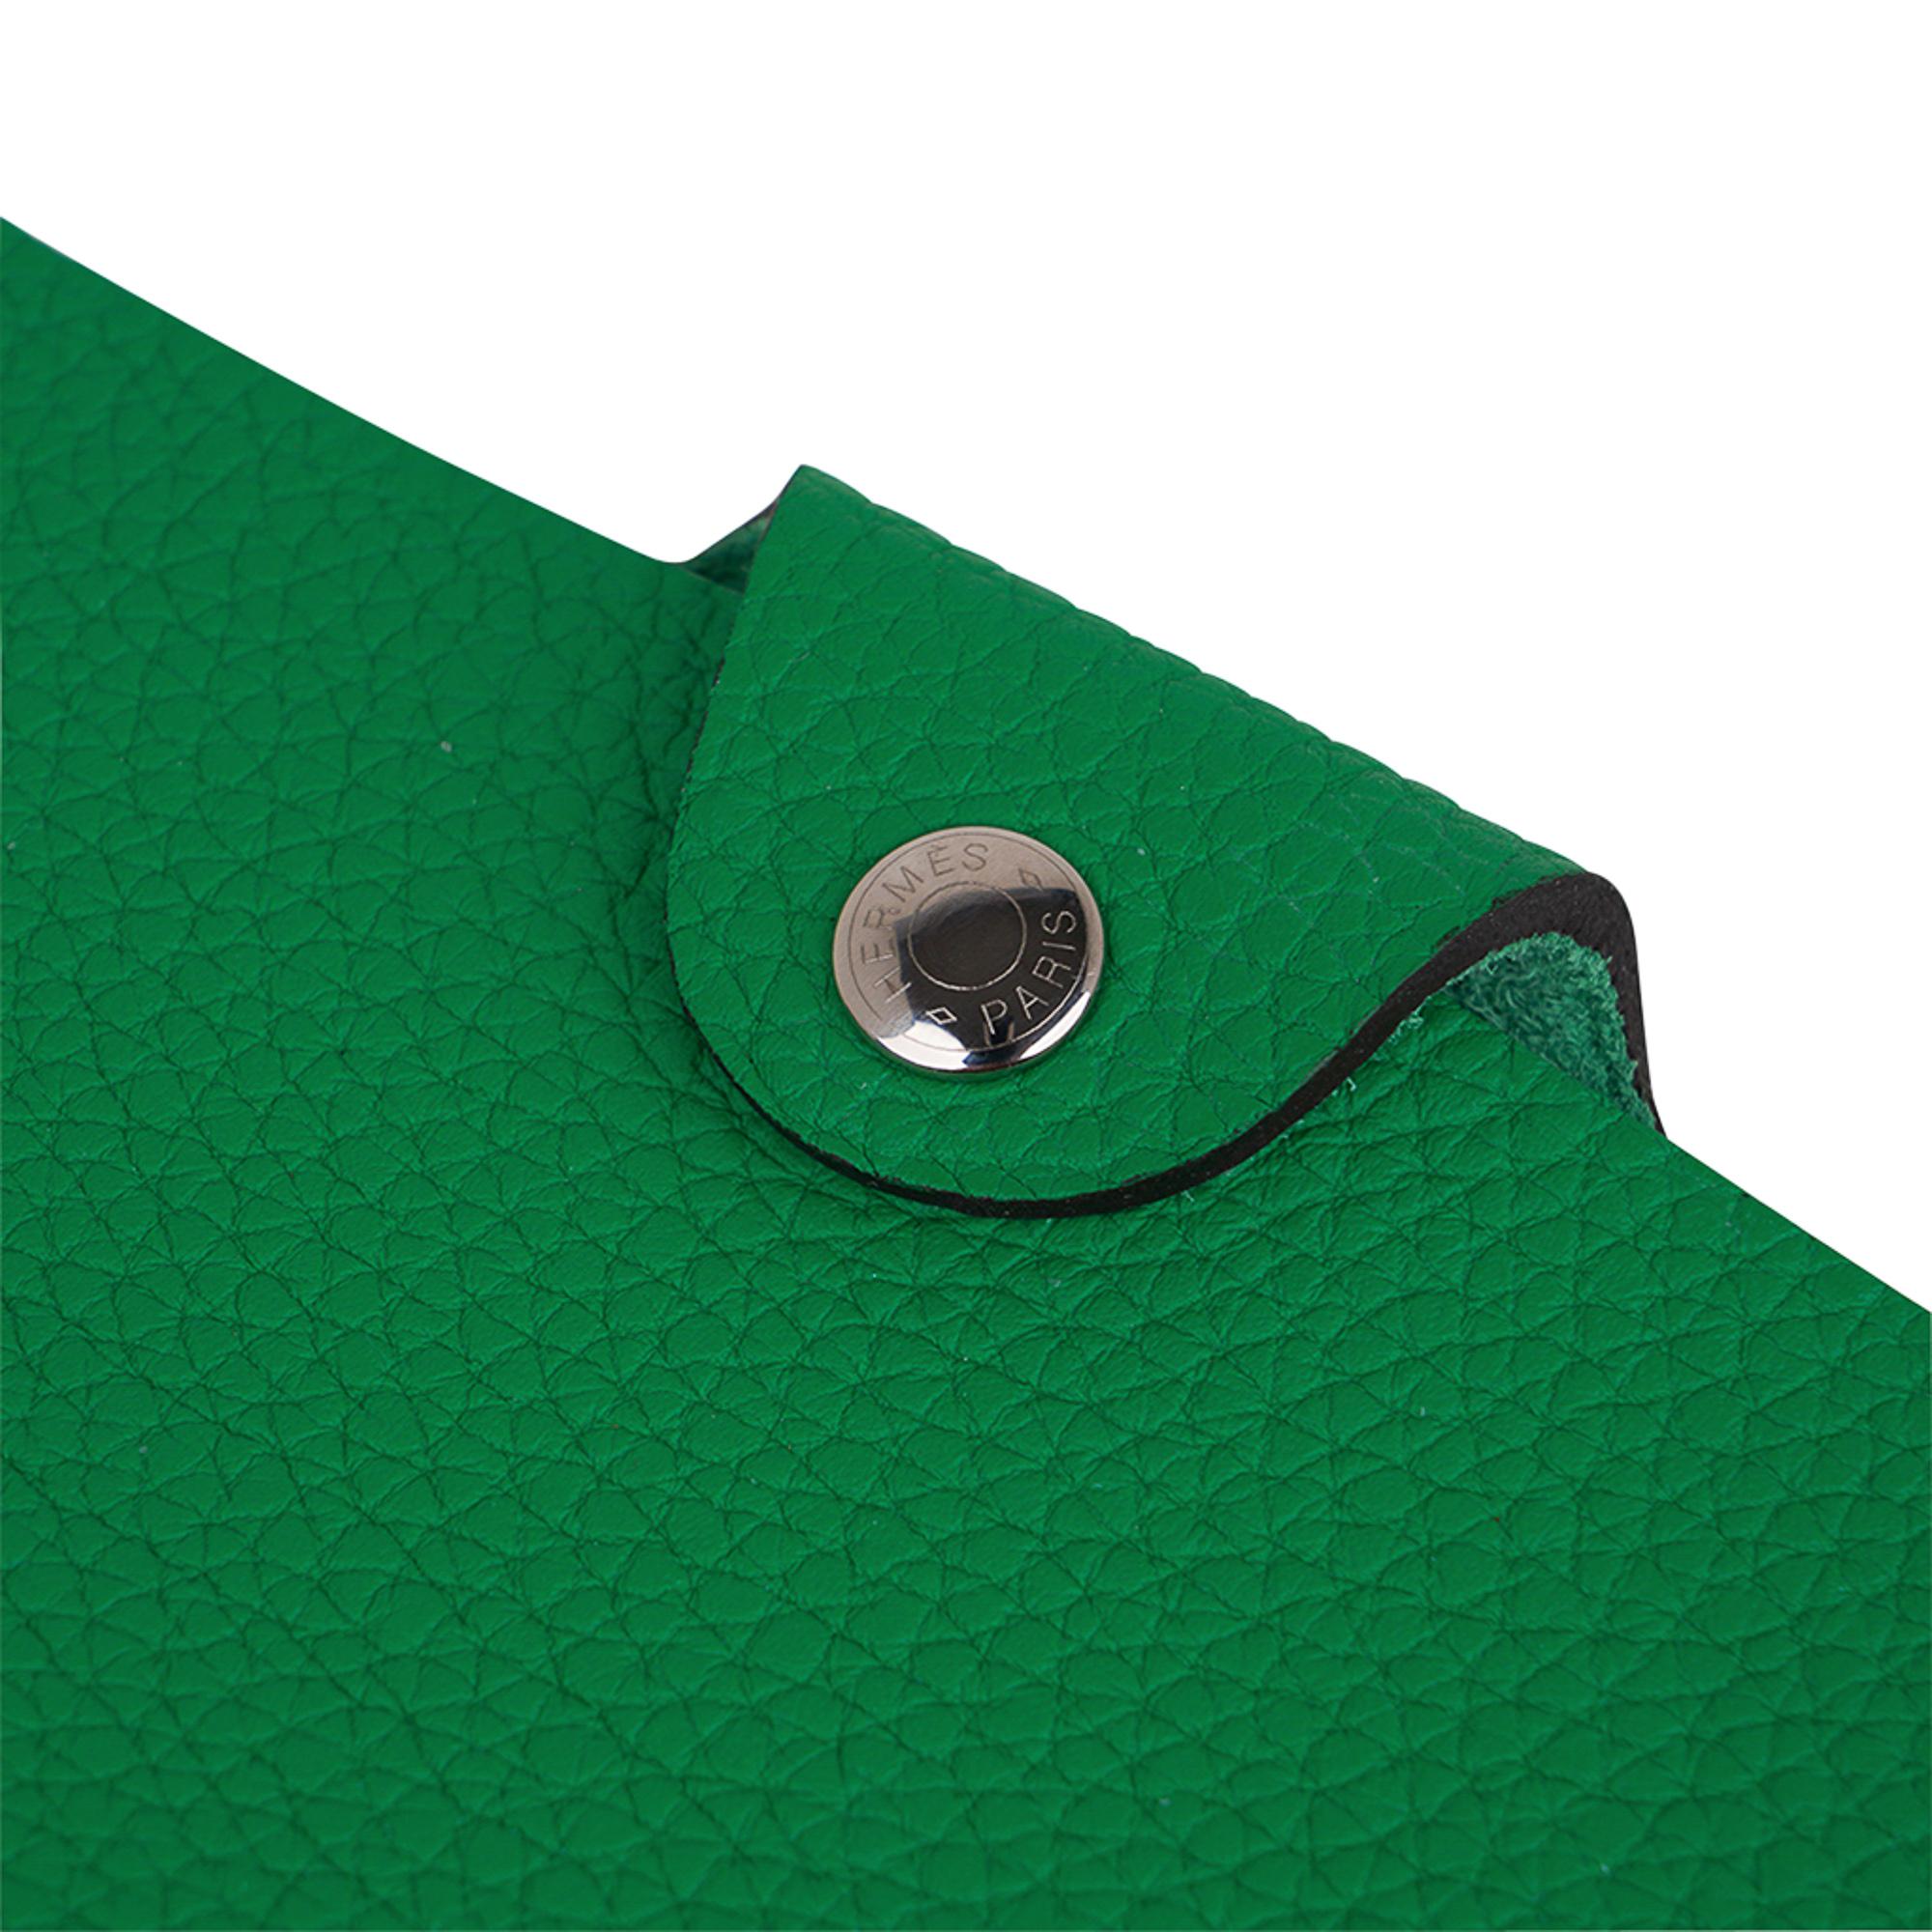 Hermes Ulysse mini model notebook cover featured in vivid Vert Bamboo.
Palladium Clou de Selle snap.
Supple Togo leather.
New or Store Fresh Condition.
final sale

AGENDA MEASURES:
LENGTH 4.1